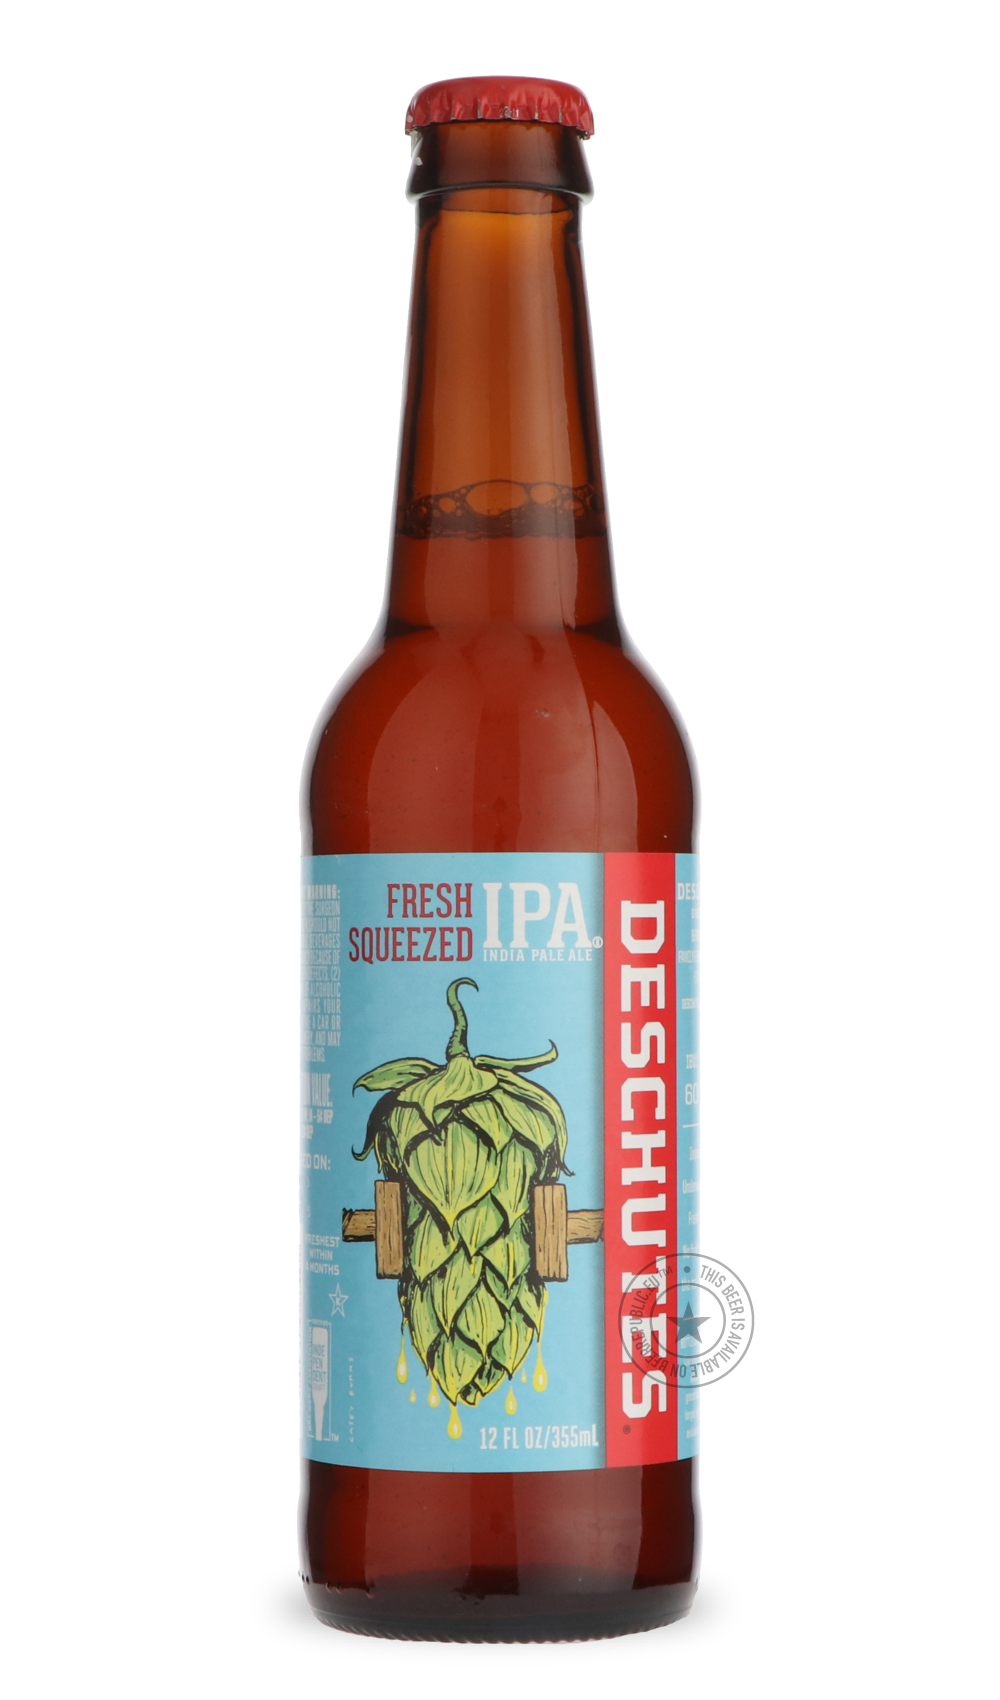 -Deschutes- Fresh Squeezed-IPA- Only @ Beer Republic - The best online beer store for American & Canadian craft beer - Buy beer online from the USA and Canada - Bier online kopen - Amerikaans bier kopen - Craft beer store - Craft beer kopen - Amerikanisch bier kaufen - Bier online kaufen - Acheter biere online - IPA - Stout - Porter - New England IPA - Hazy IPA - Imperial Stout - Barrel Aged - Barrel Aged Imperial Stout - Brown - Dark beer - Blond - Blonde - Pilsner - Lager - Wheat - Weizen - Amber - Barley